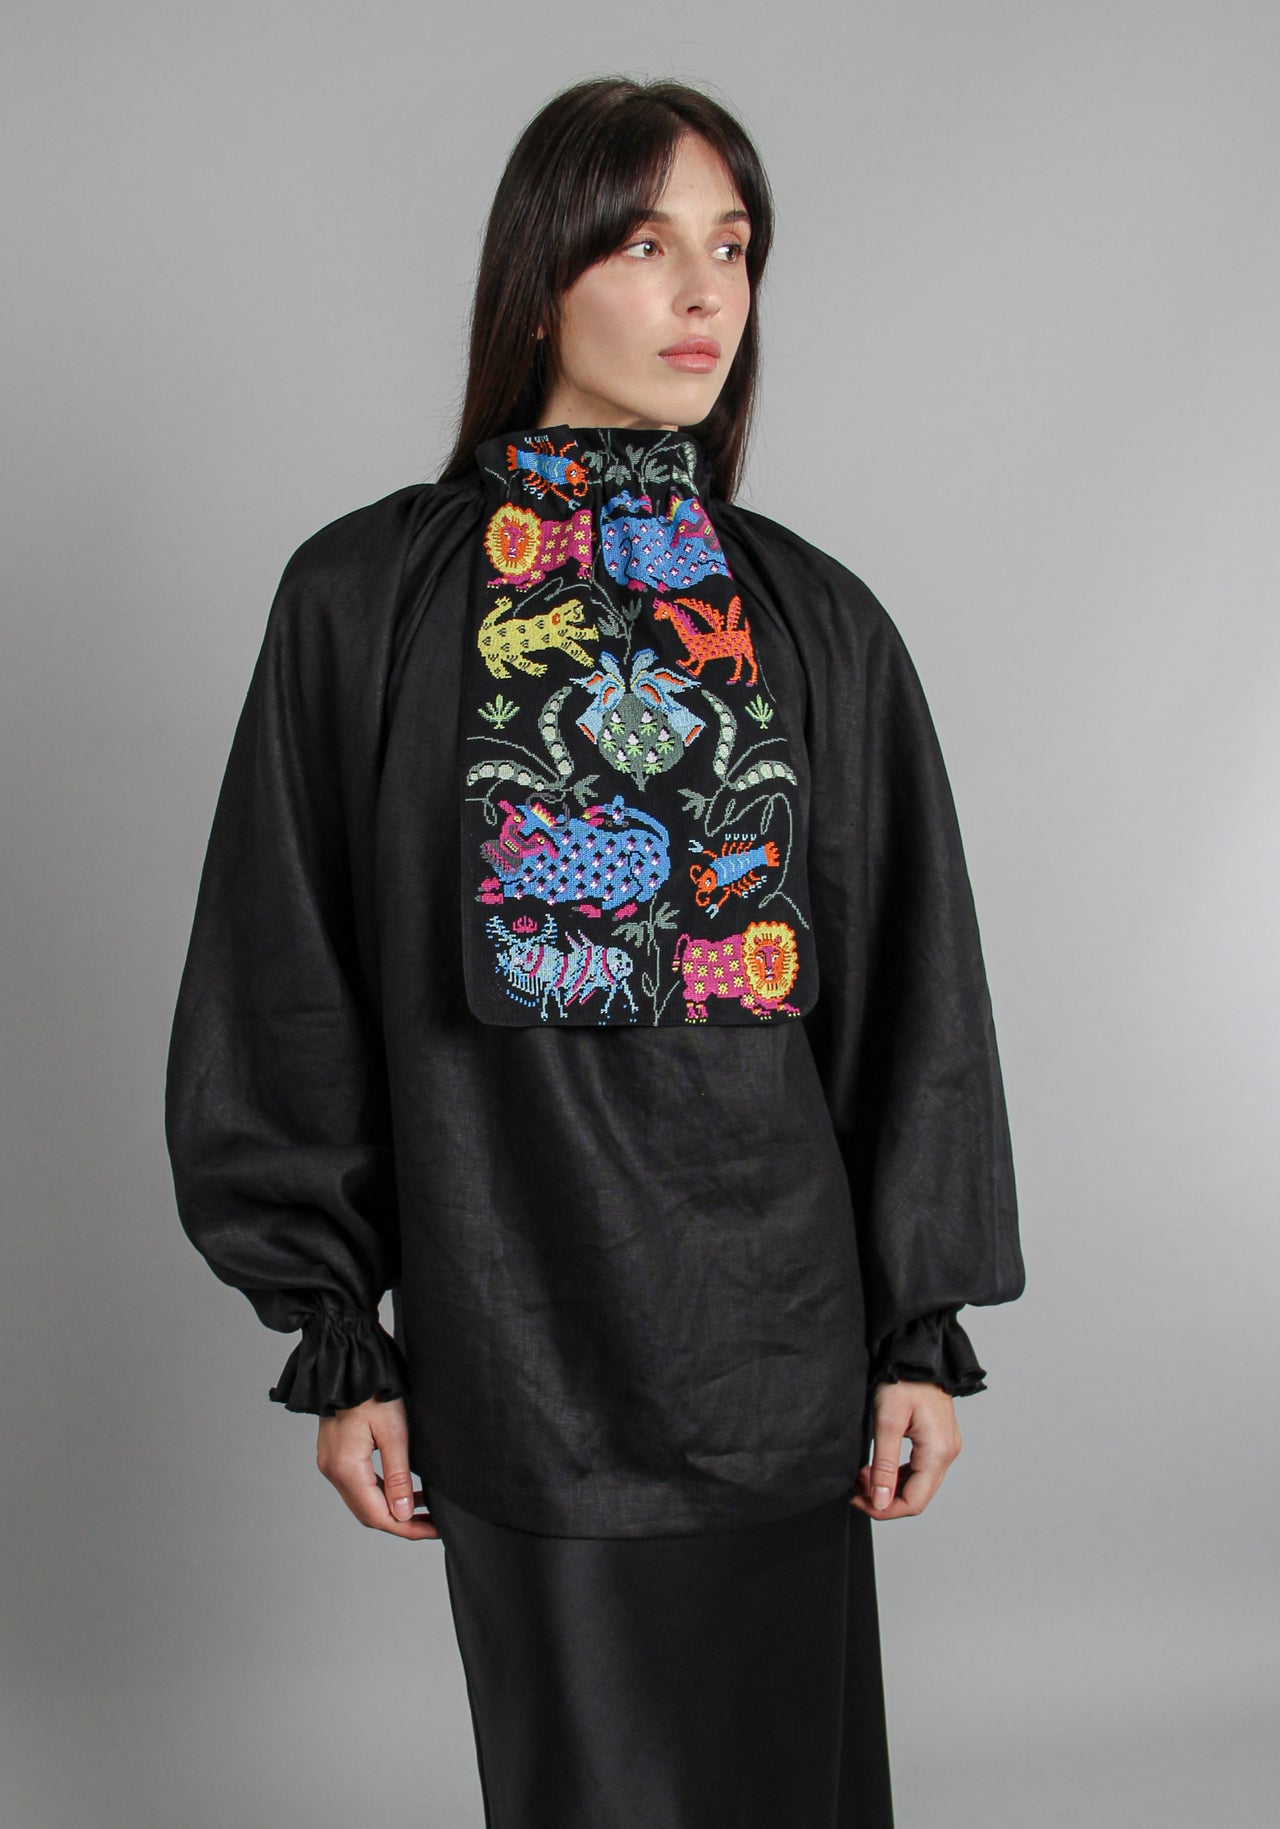 Long sleeve shirt with high neck embroidered element